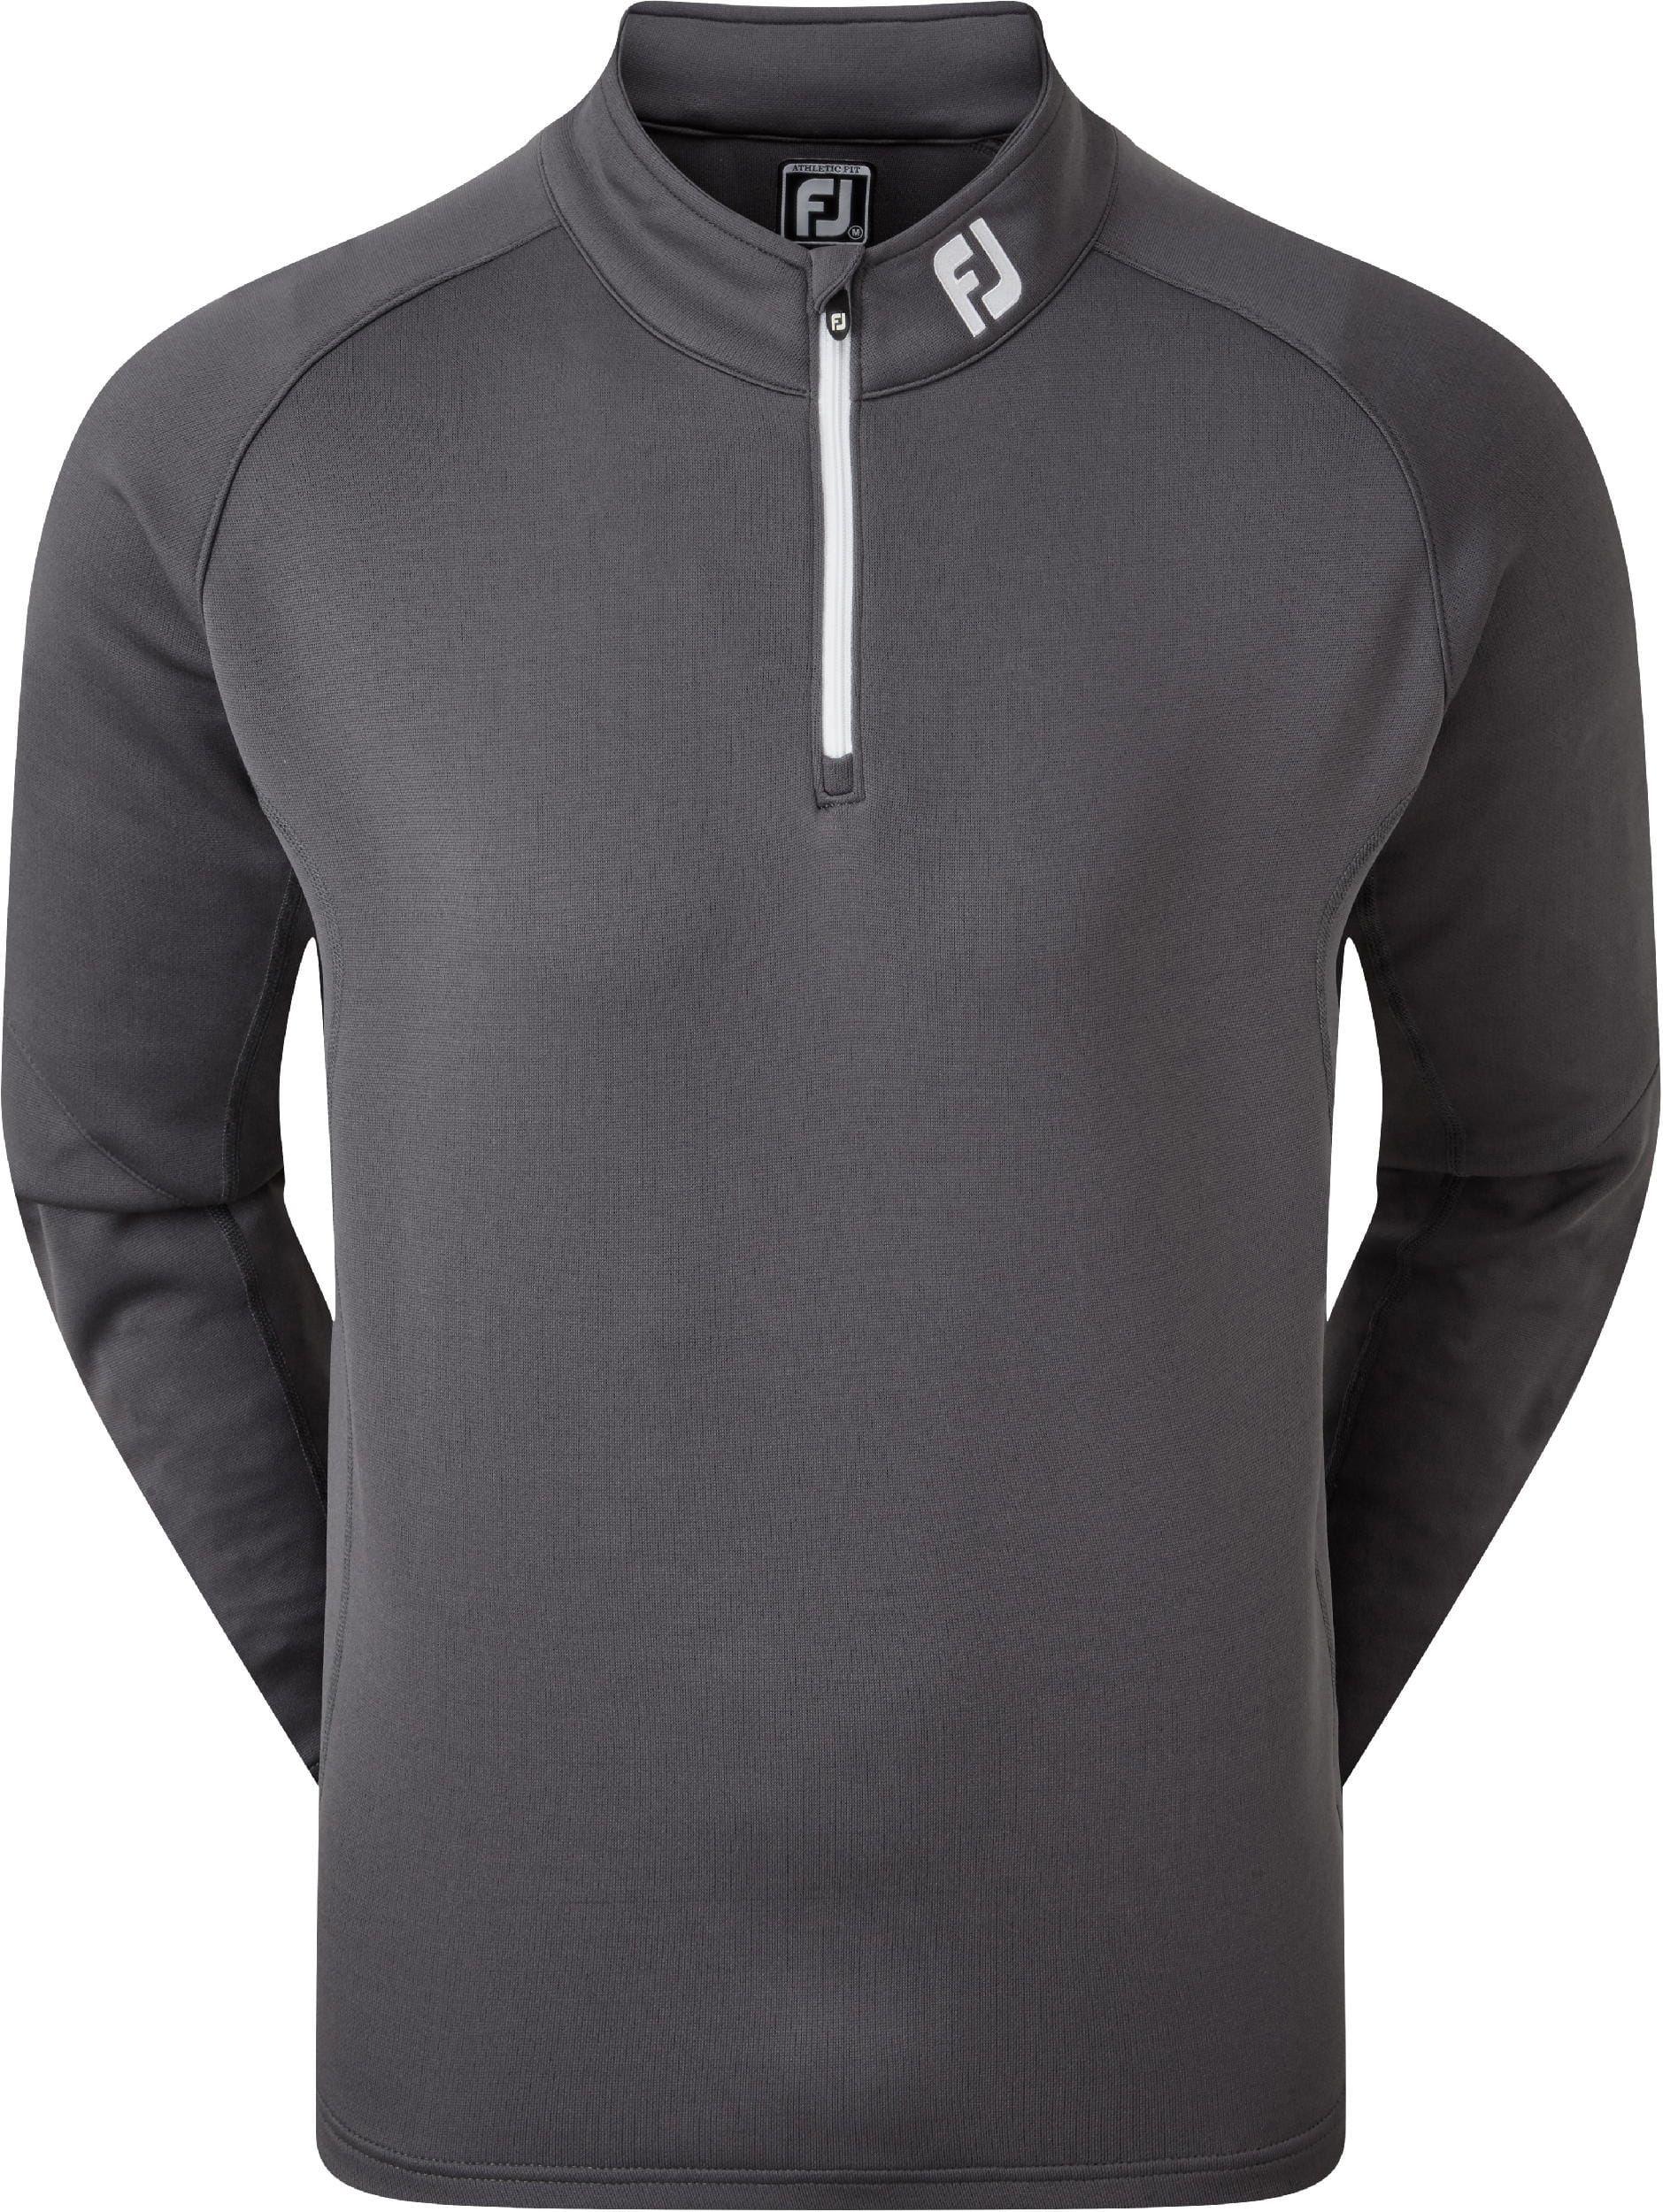 FootJoy Chill-Out Midlayer, charcoal